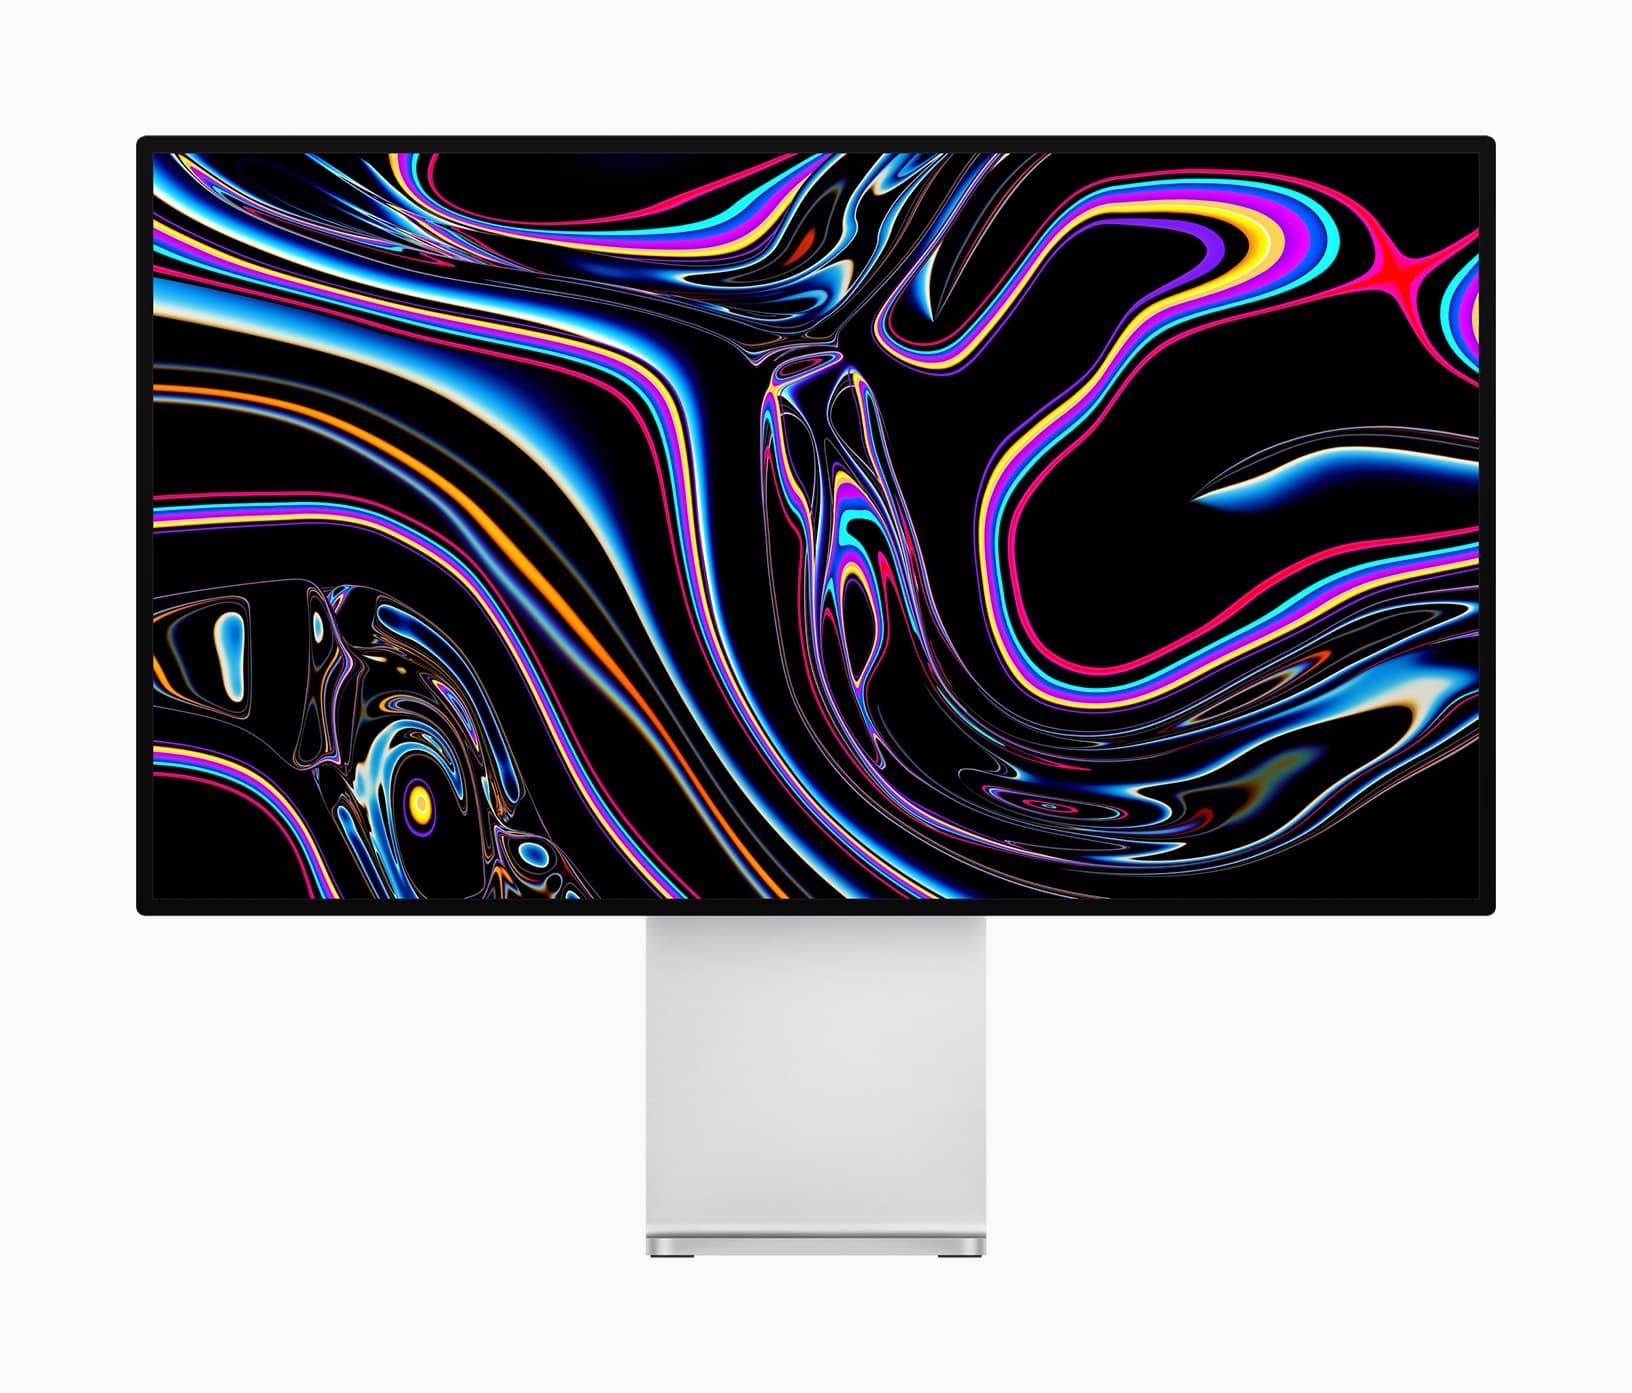 Apple Pro XDR Display from the front